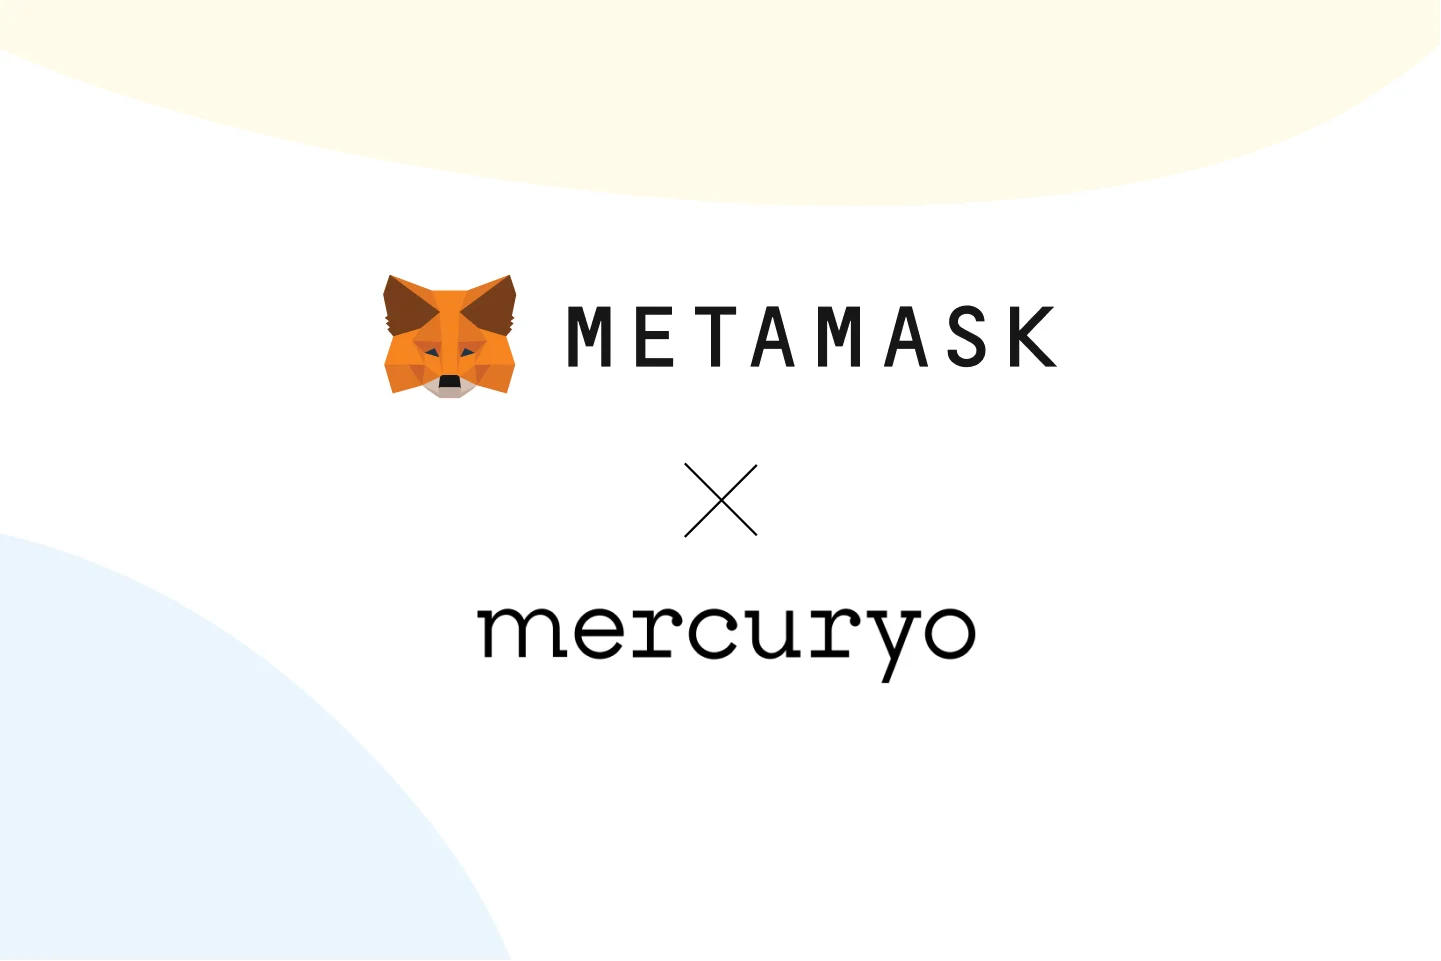 Consensys partners with Mercuryo to offer seamless crypto purchases within MetaMask